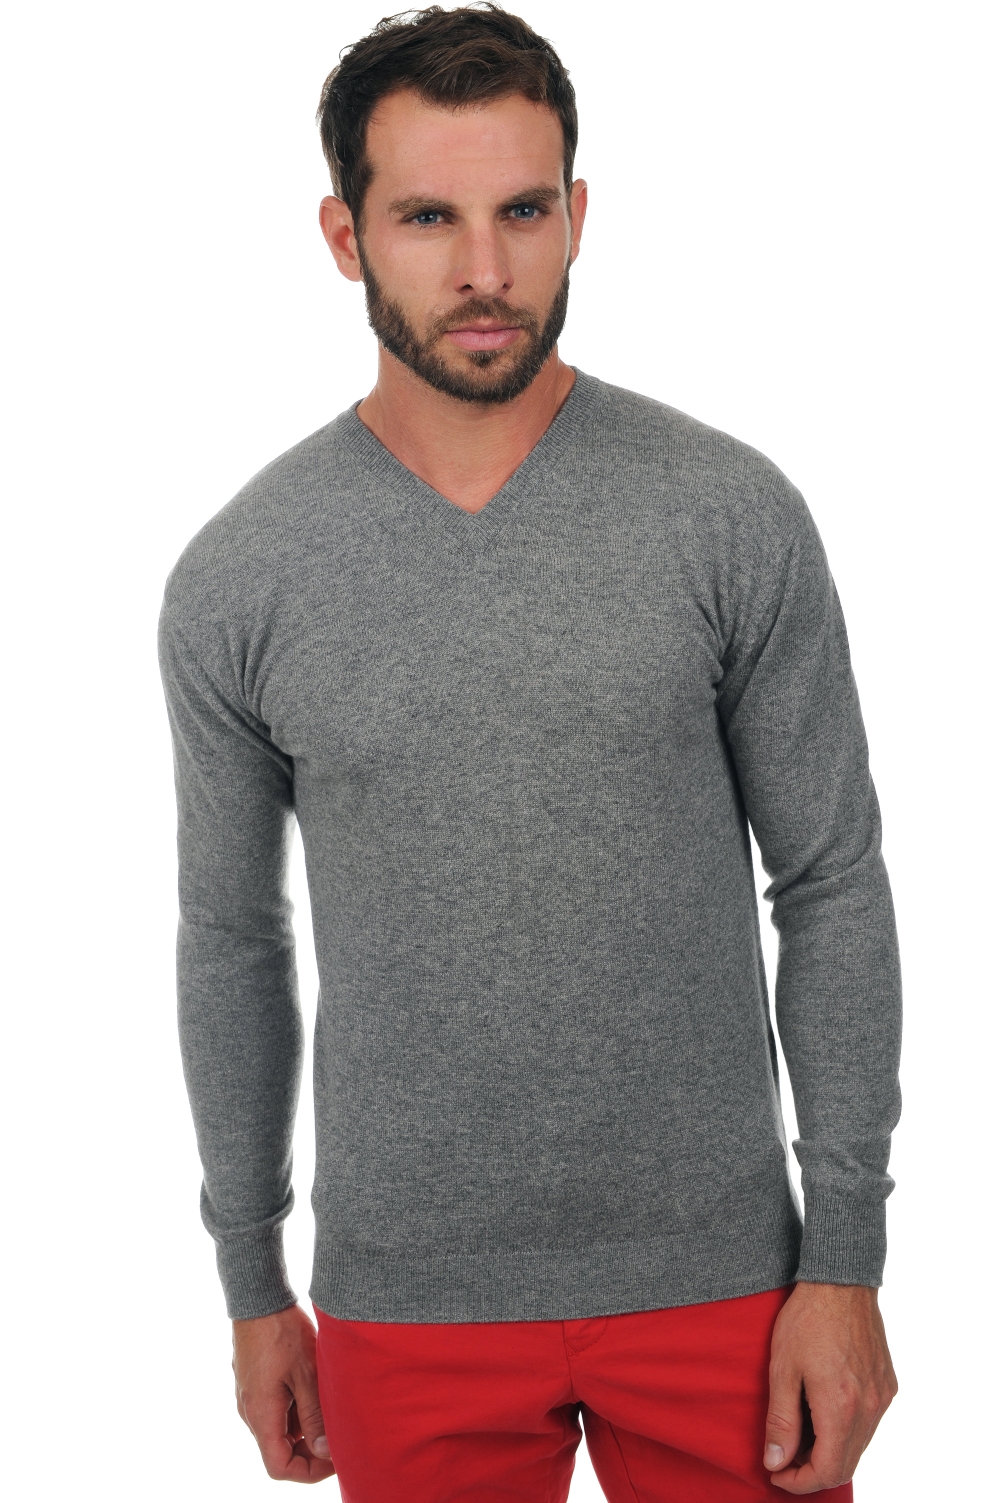 Cachemire pull homme maddox gris chine 3xl